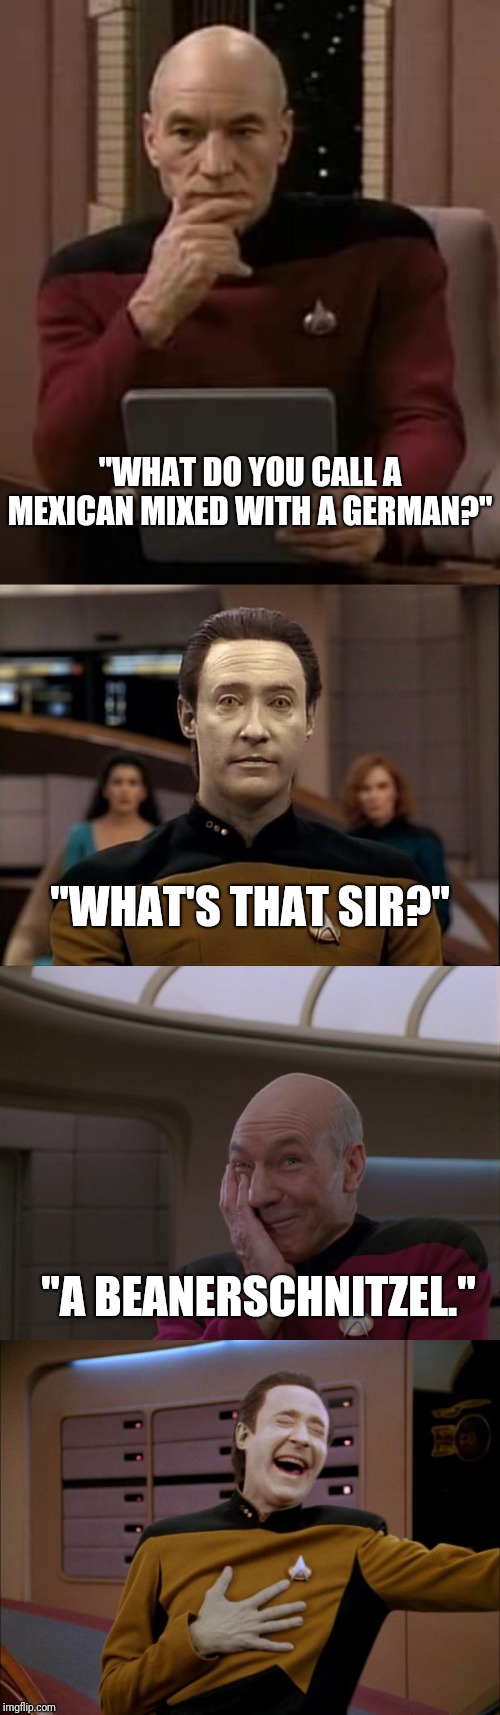 Dudumtss | "WHAT DO YOU CALL A MEXICAN MIXED WITH A GERMAN?"; "WHAT'S THAT SIR?"; "A BEANERSCHNITZEL." | image tagged in picard thinking,star trek data,stupid joke picard,laughing data,funny memes,lol | made w/ Imgflip meme maker